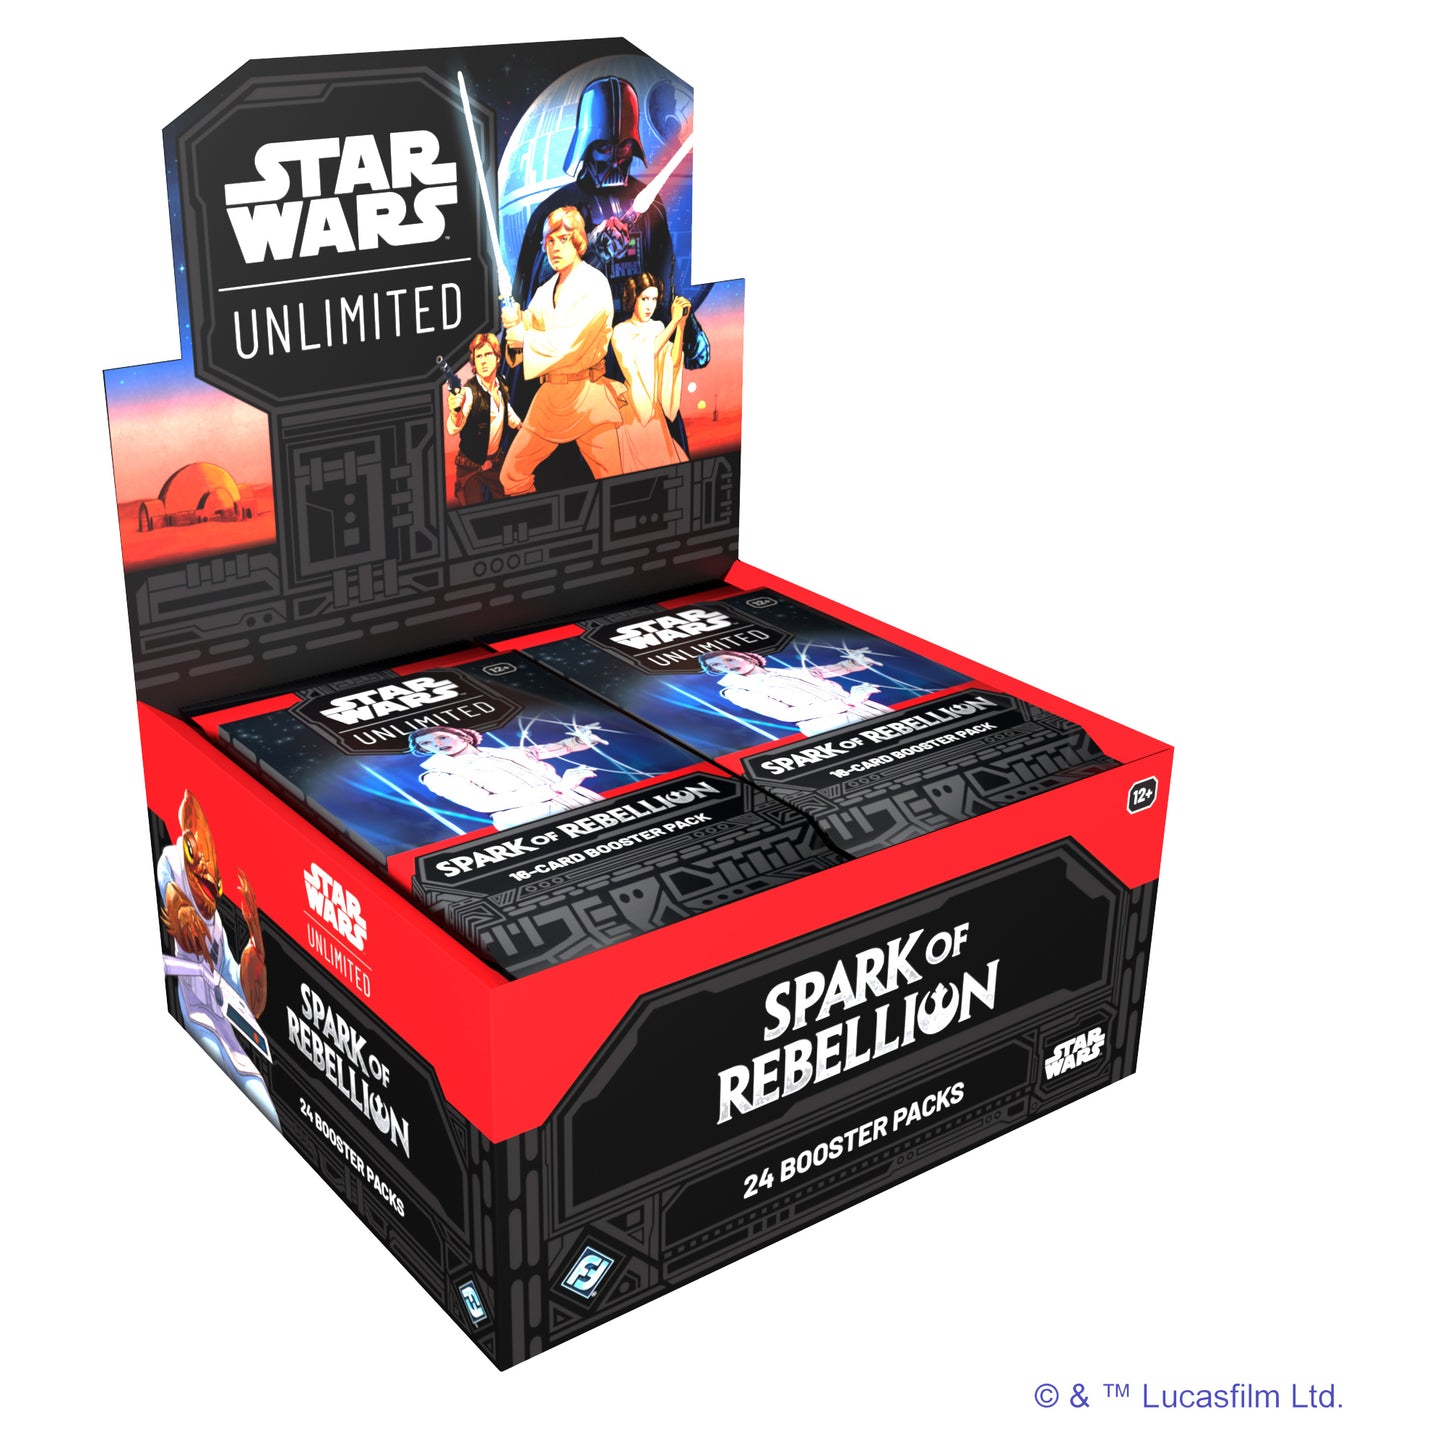 Star Wars Unlimited - Spark of Rebellion Booster Case (6 Boxes) (Preorder)